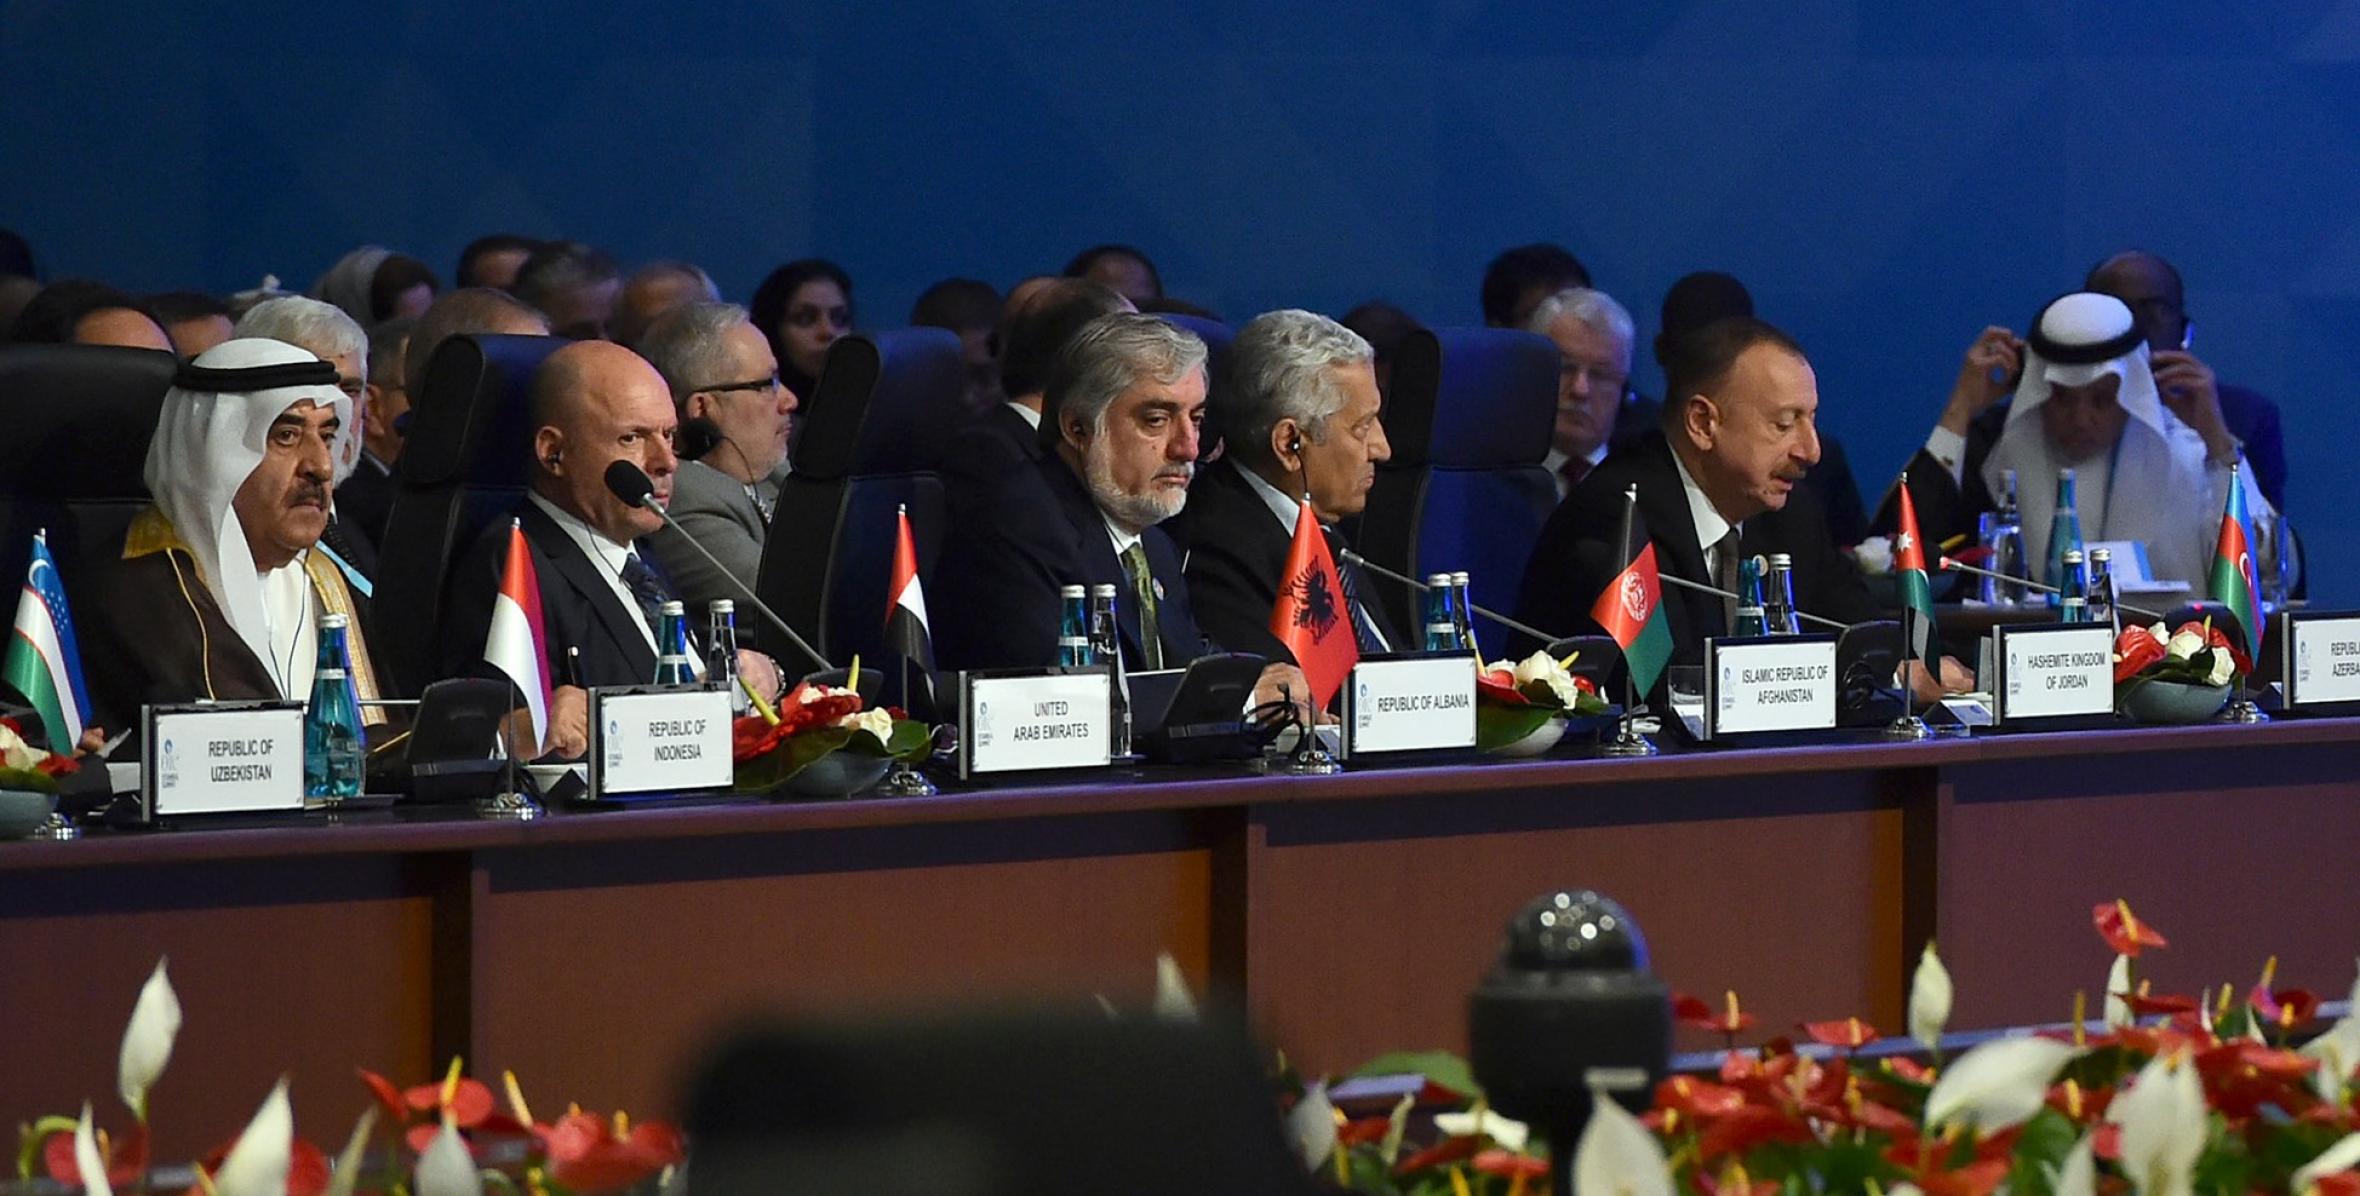 Speech by Ilham Aliyev at the first session of 13th Summit of Organization of Islamic Cooperation in Istanbul